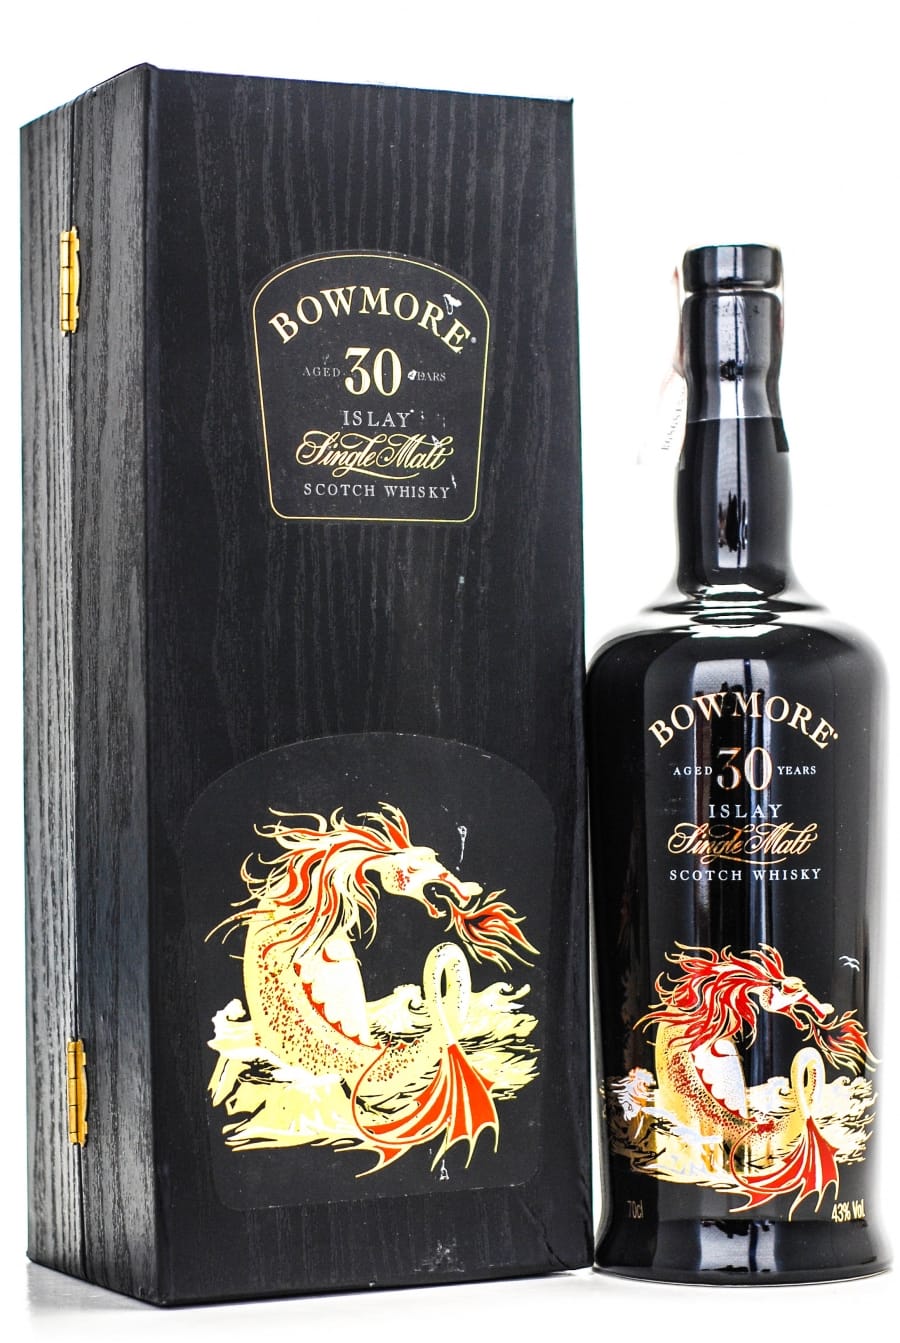 Bowmore - Bowmore 30 Years Old Seadragon Bottling Serie 1 Of  1800 Bottles 43% NAS Perfect